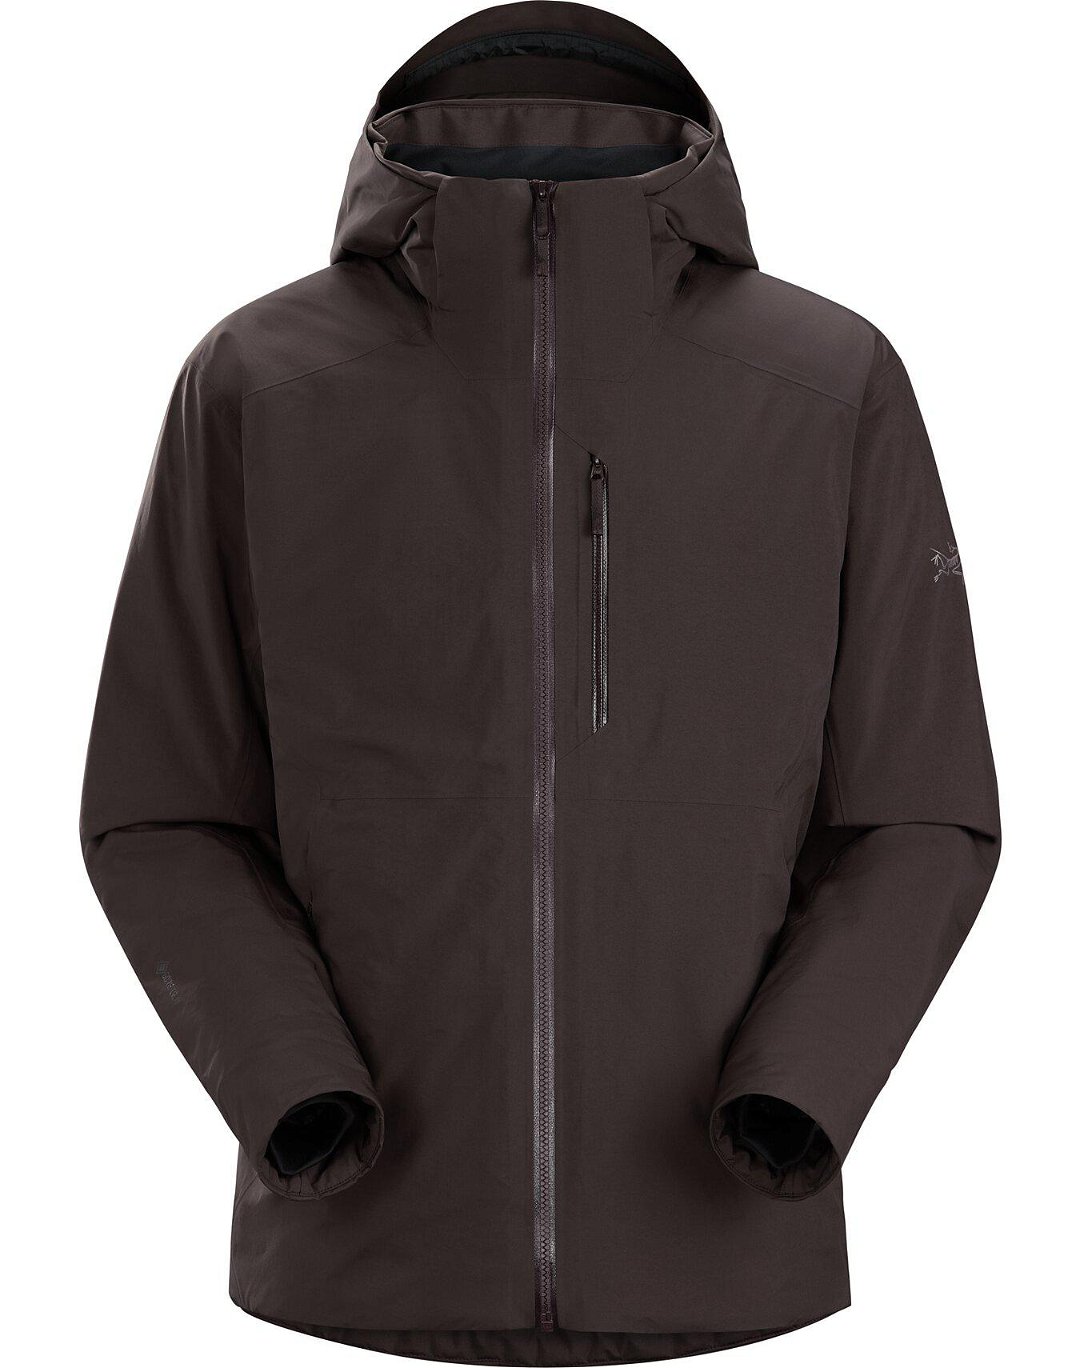 Ralle Insulated Jacket Men's by ARC'TERYX | jellibeans